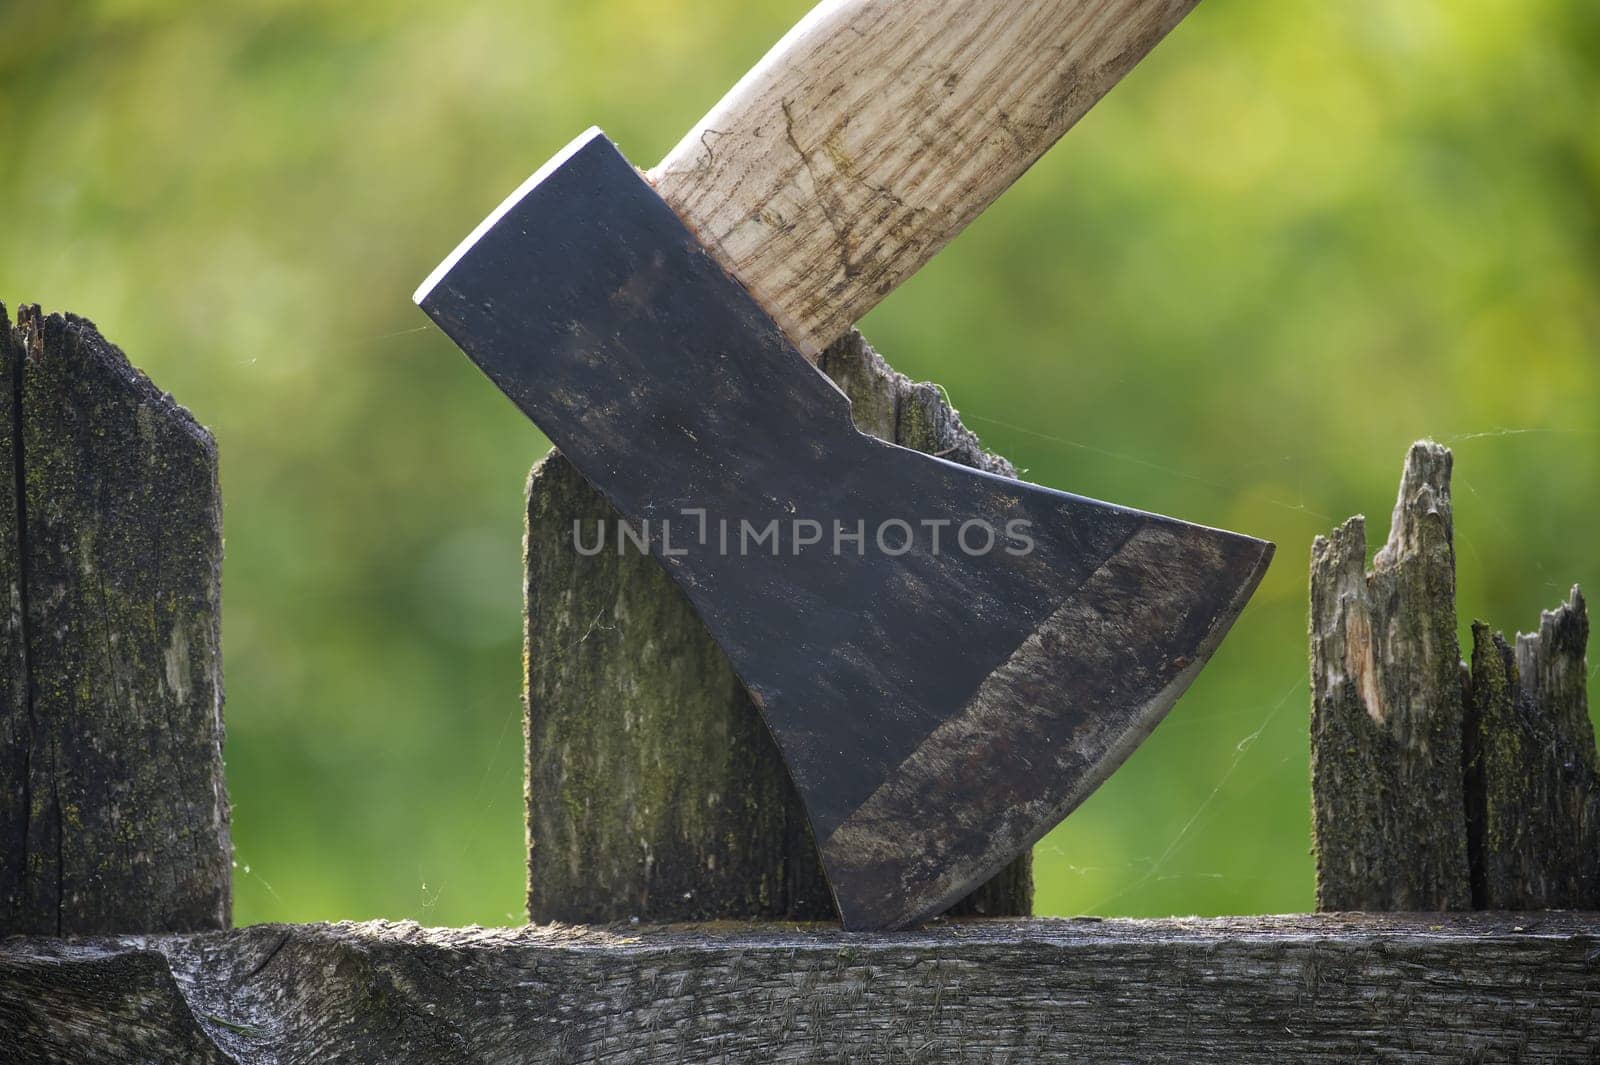 Detailed view of axe lodged into an old, weathered wooden fence by NetPix